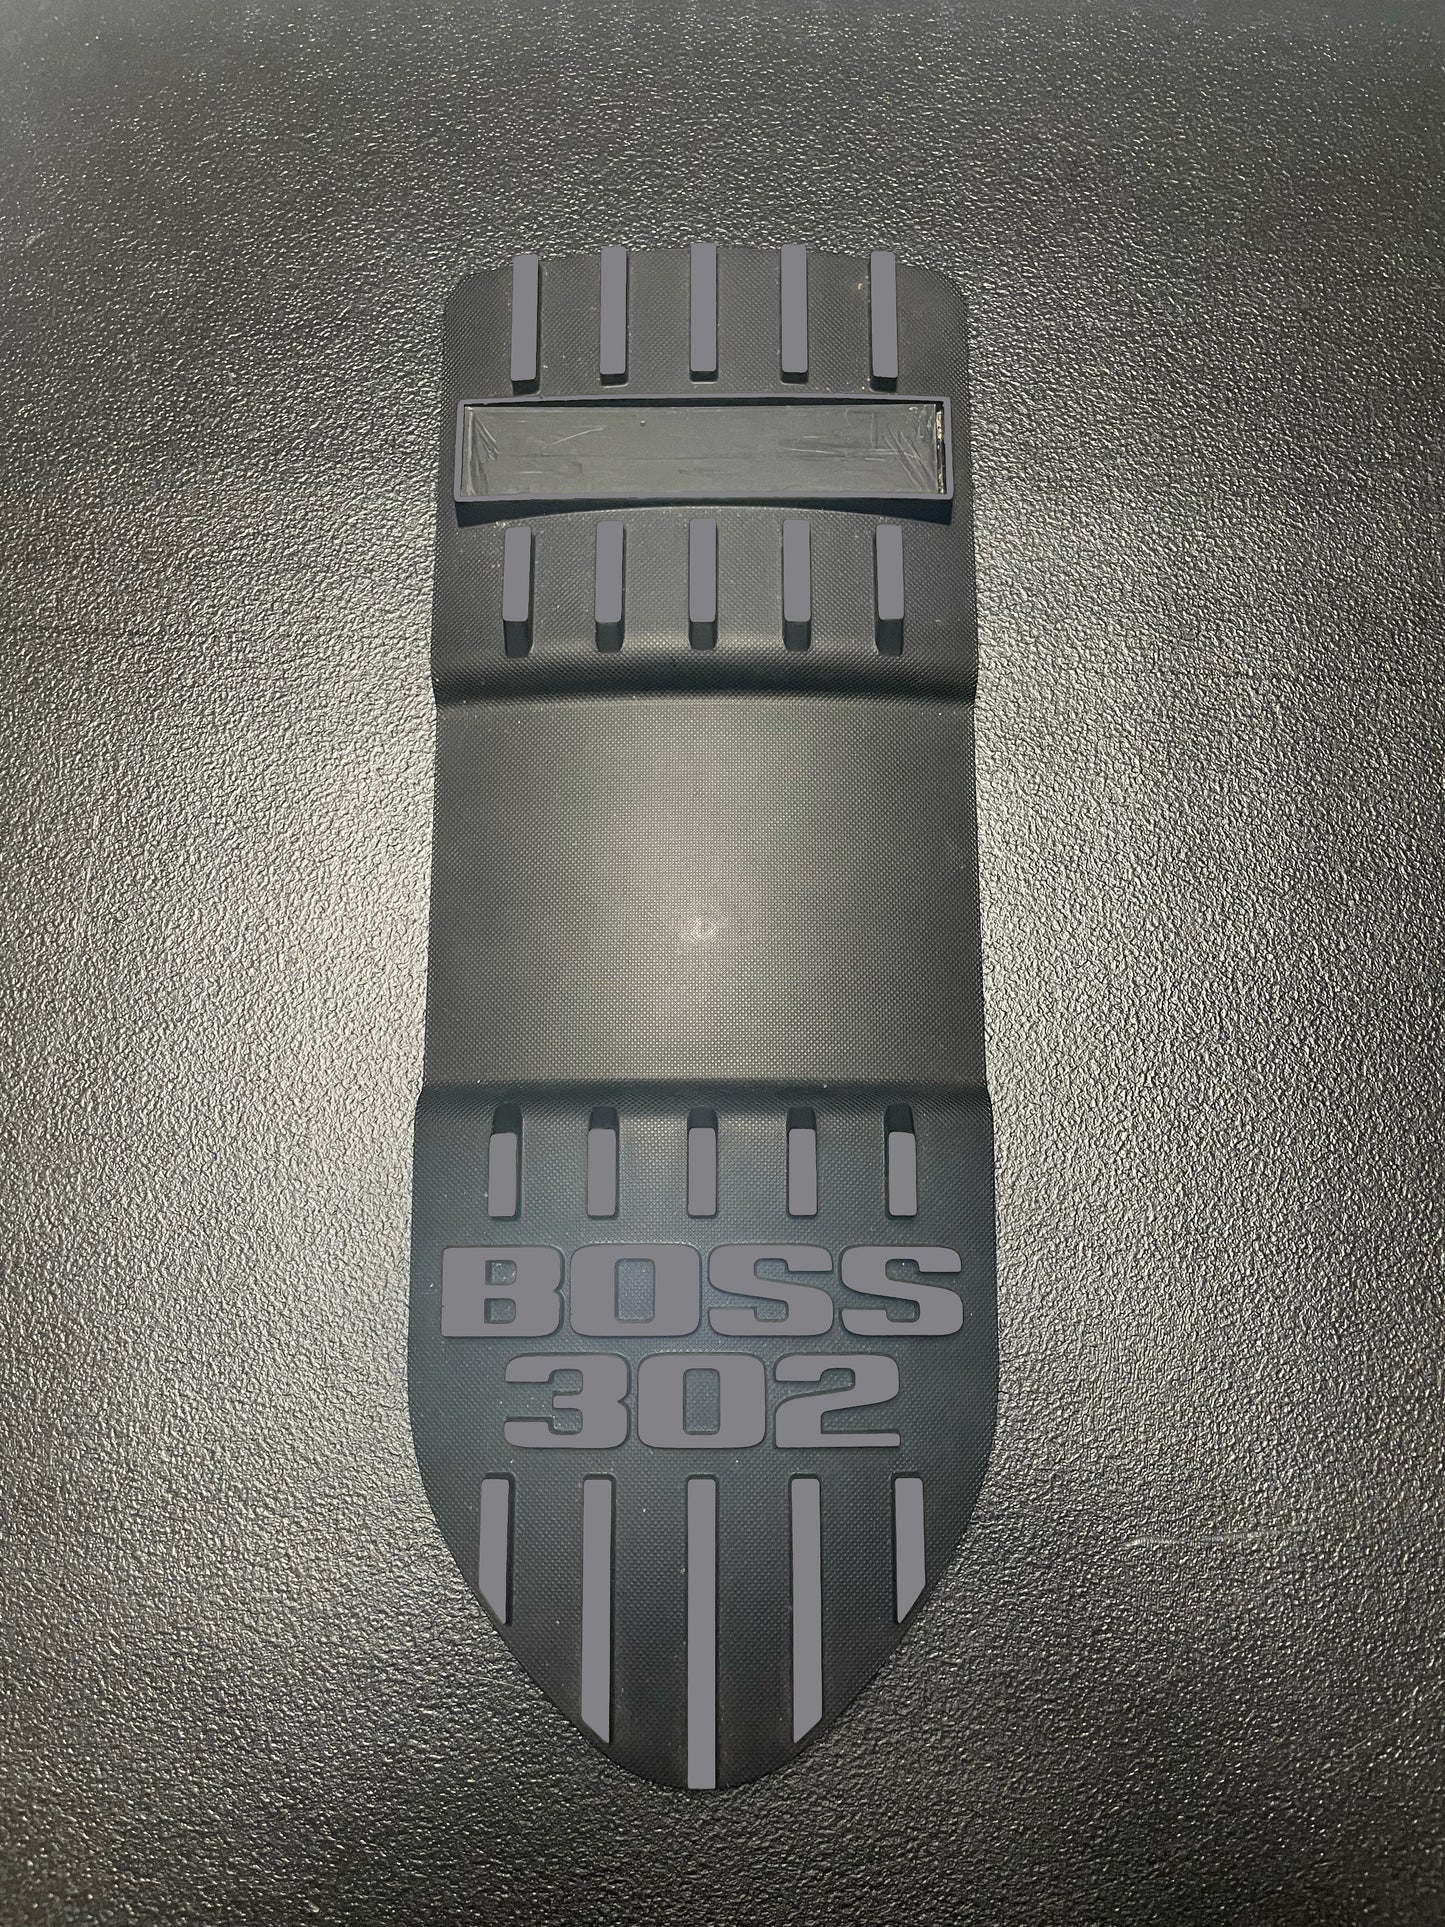 Boss 302 Engine Cover Accents (2012-2013 Mustang Boss 302)